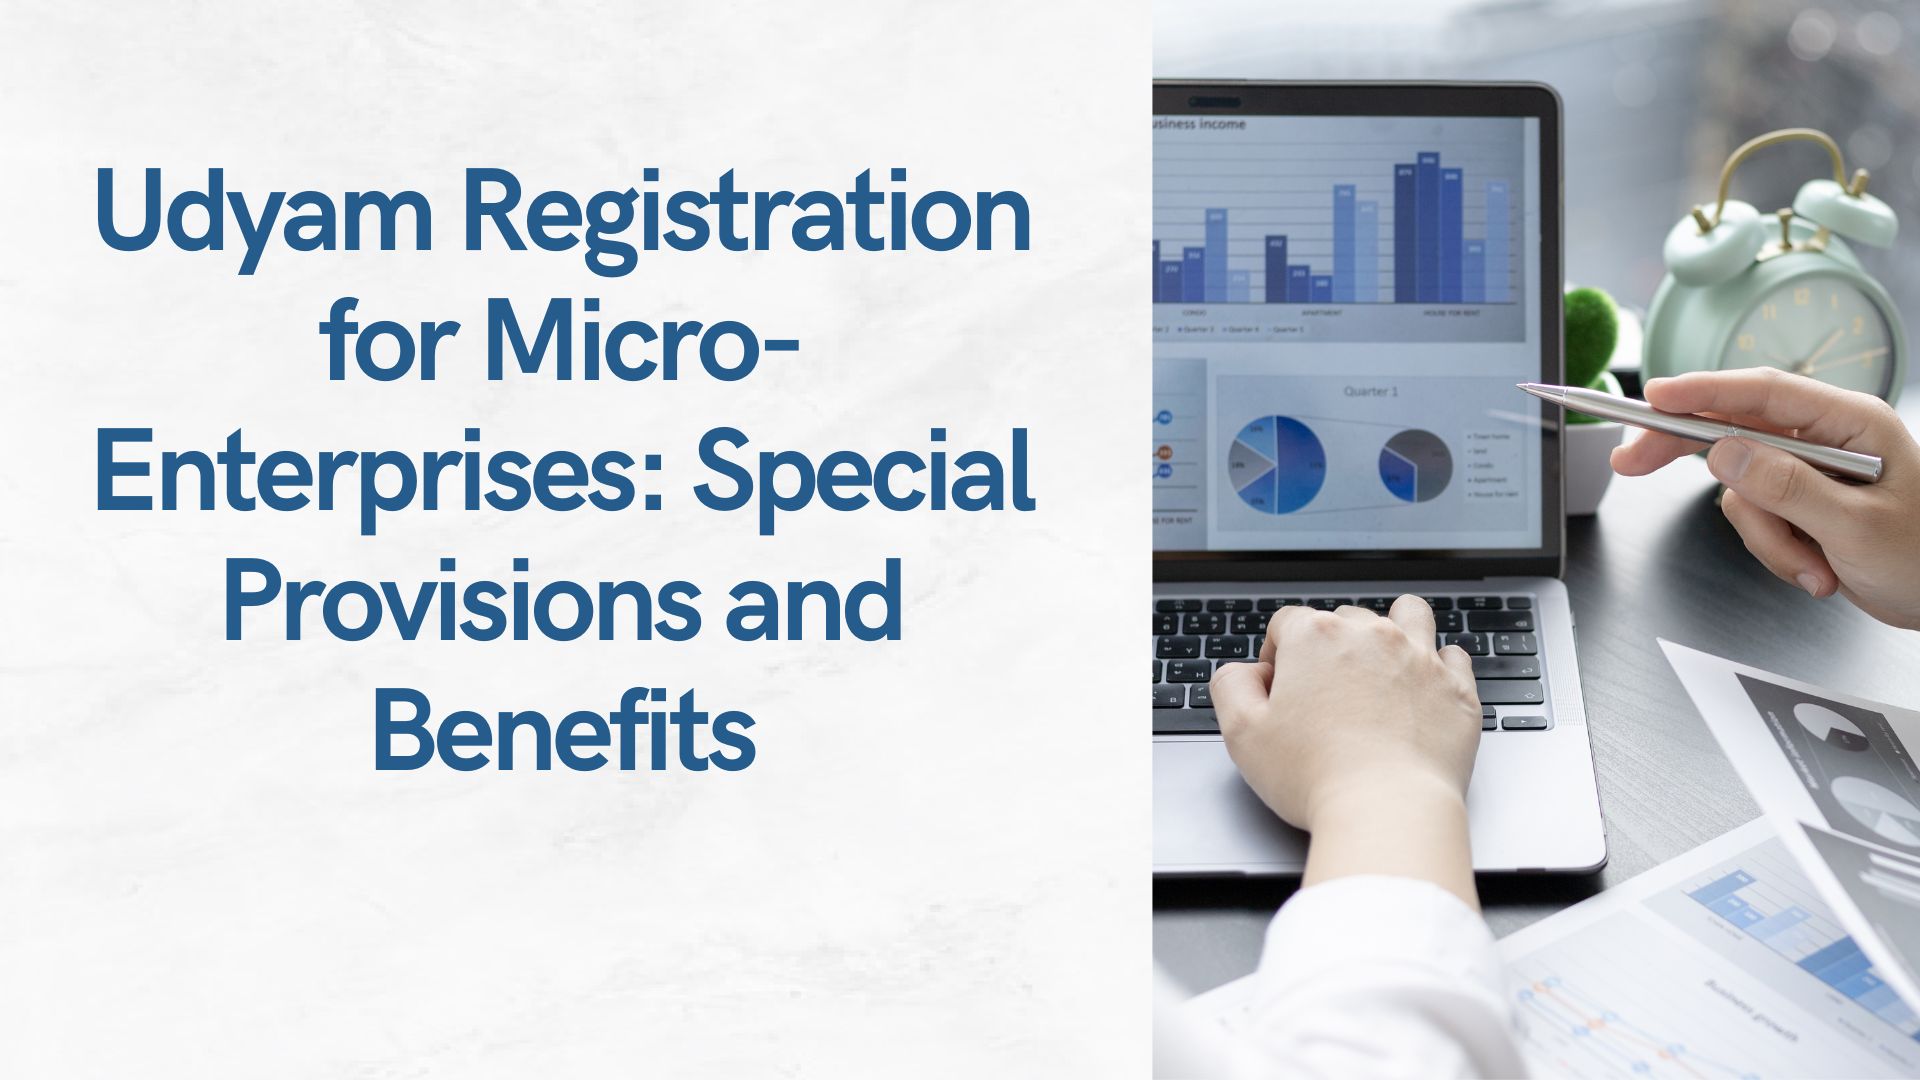 Udyam Registration for Micro-Enterprises Special Provisions and Benefits